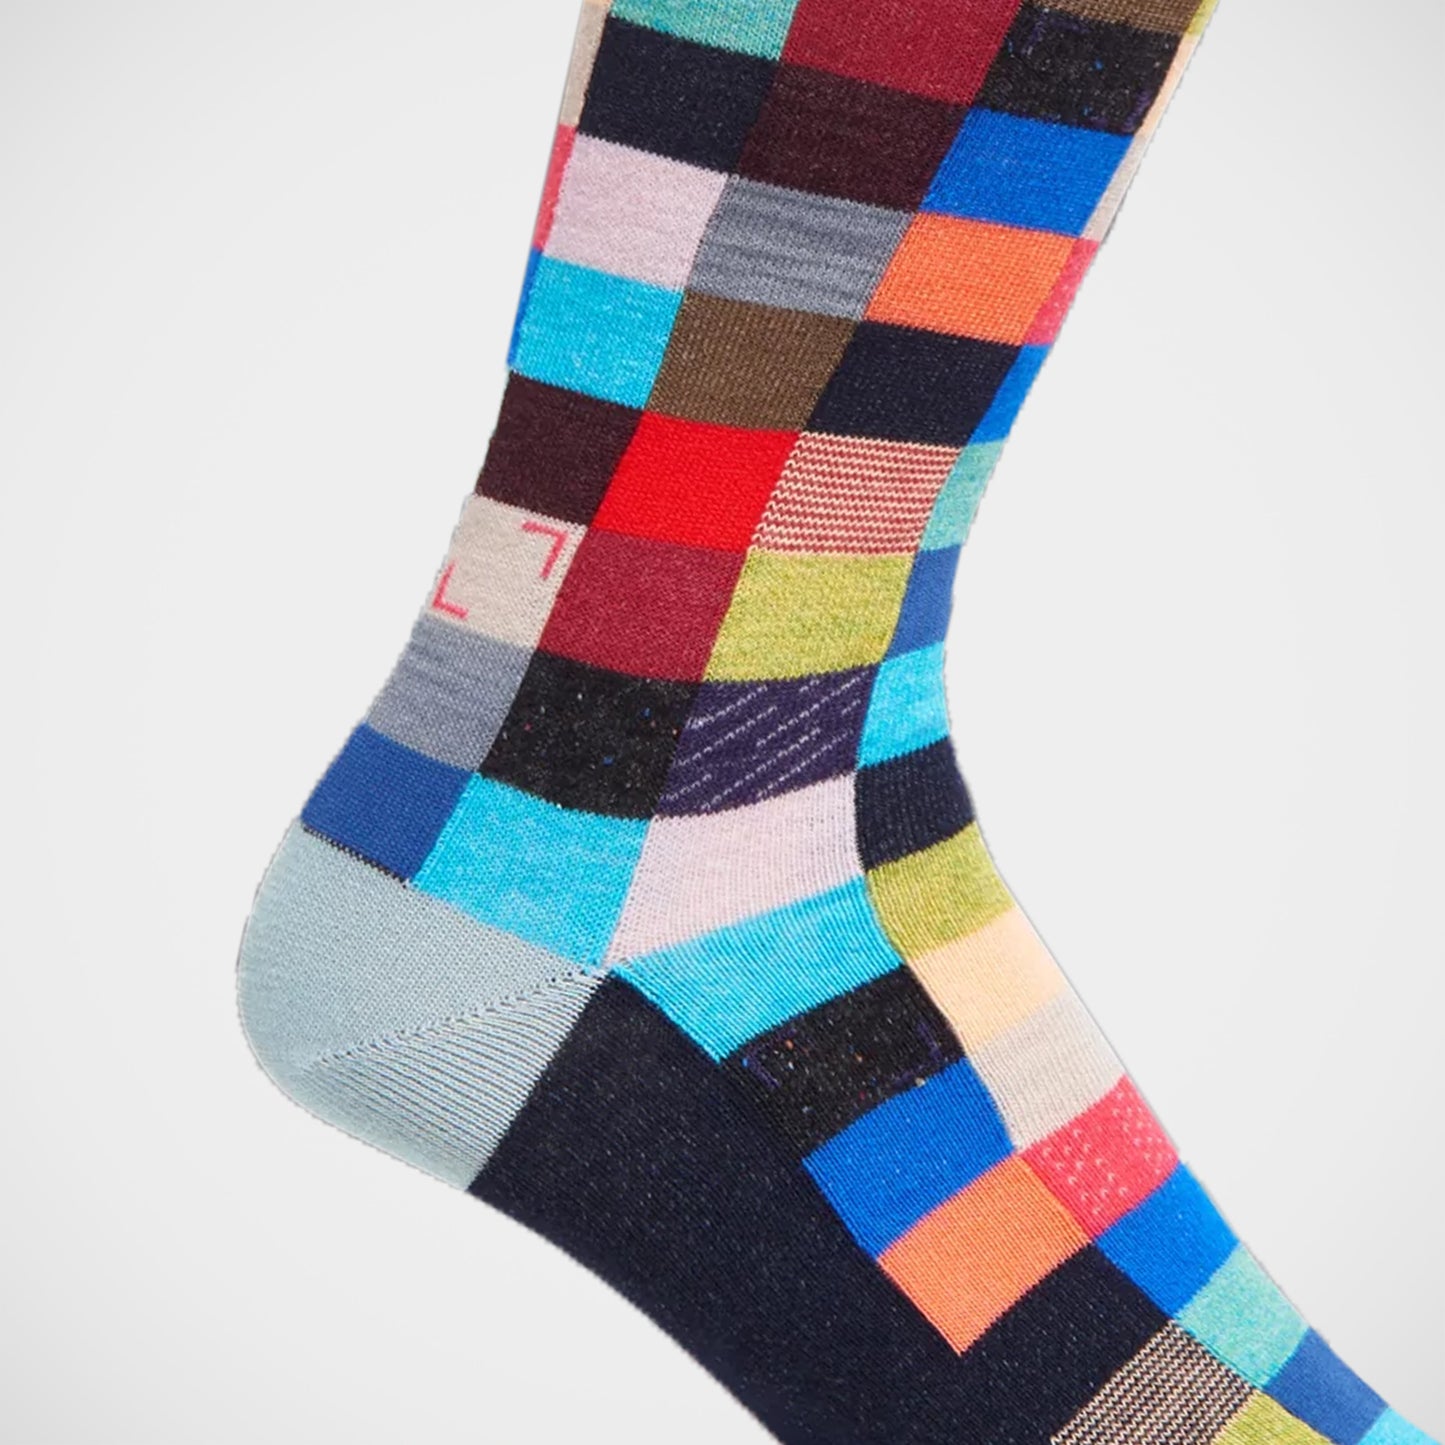 'Colourful Patchwork' Socks